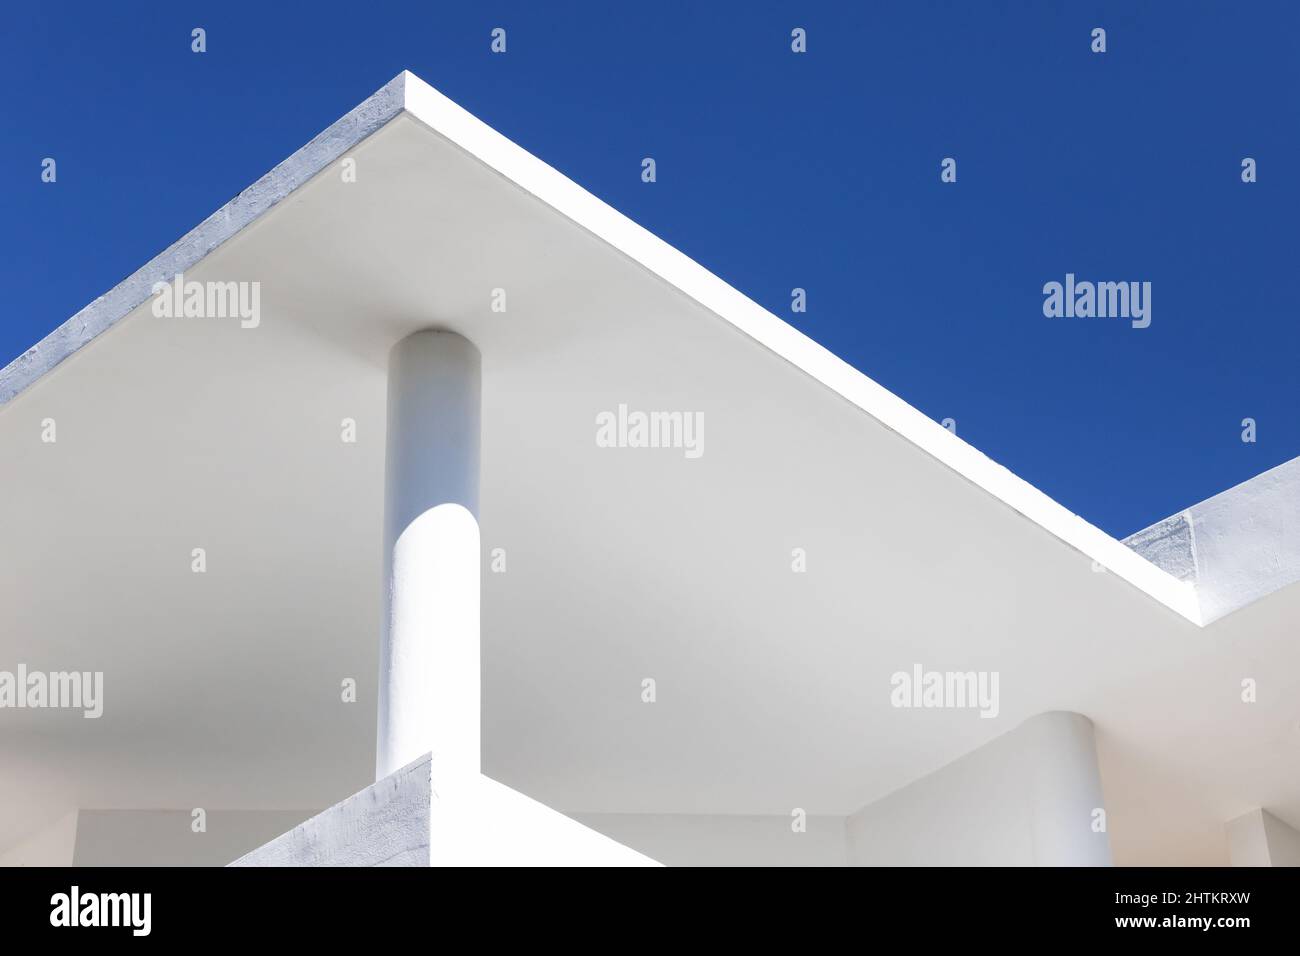 Abstract architecture background with white concrete house exterior details under clear blue sky Stock Photo